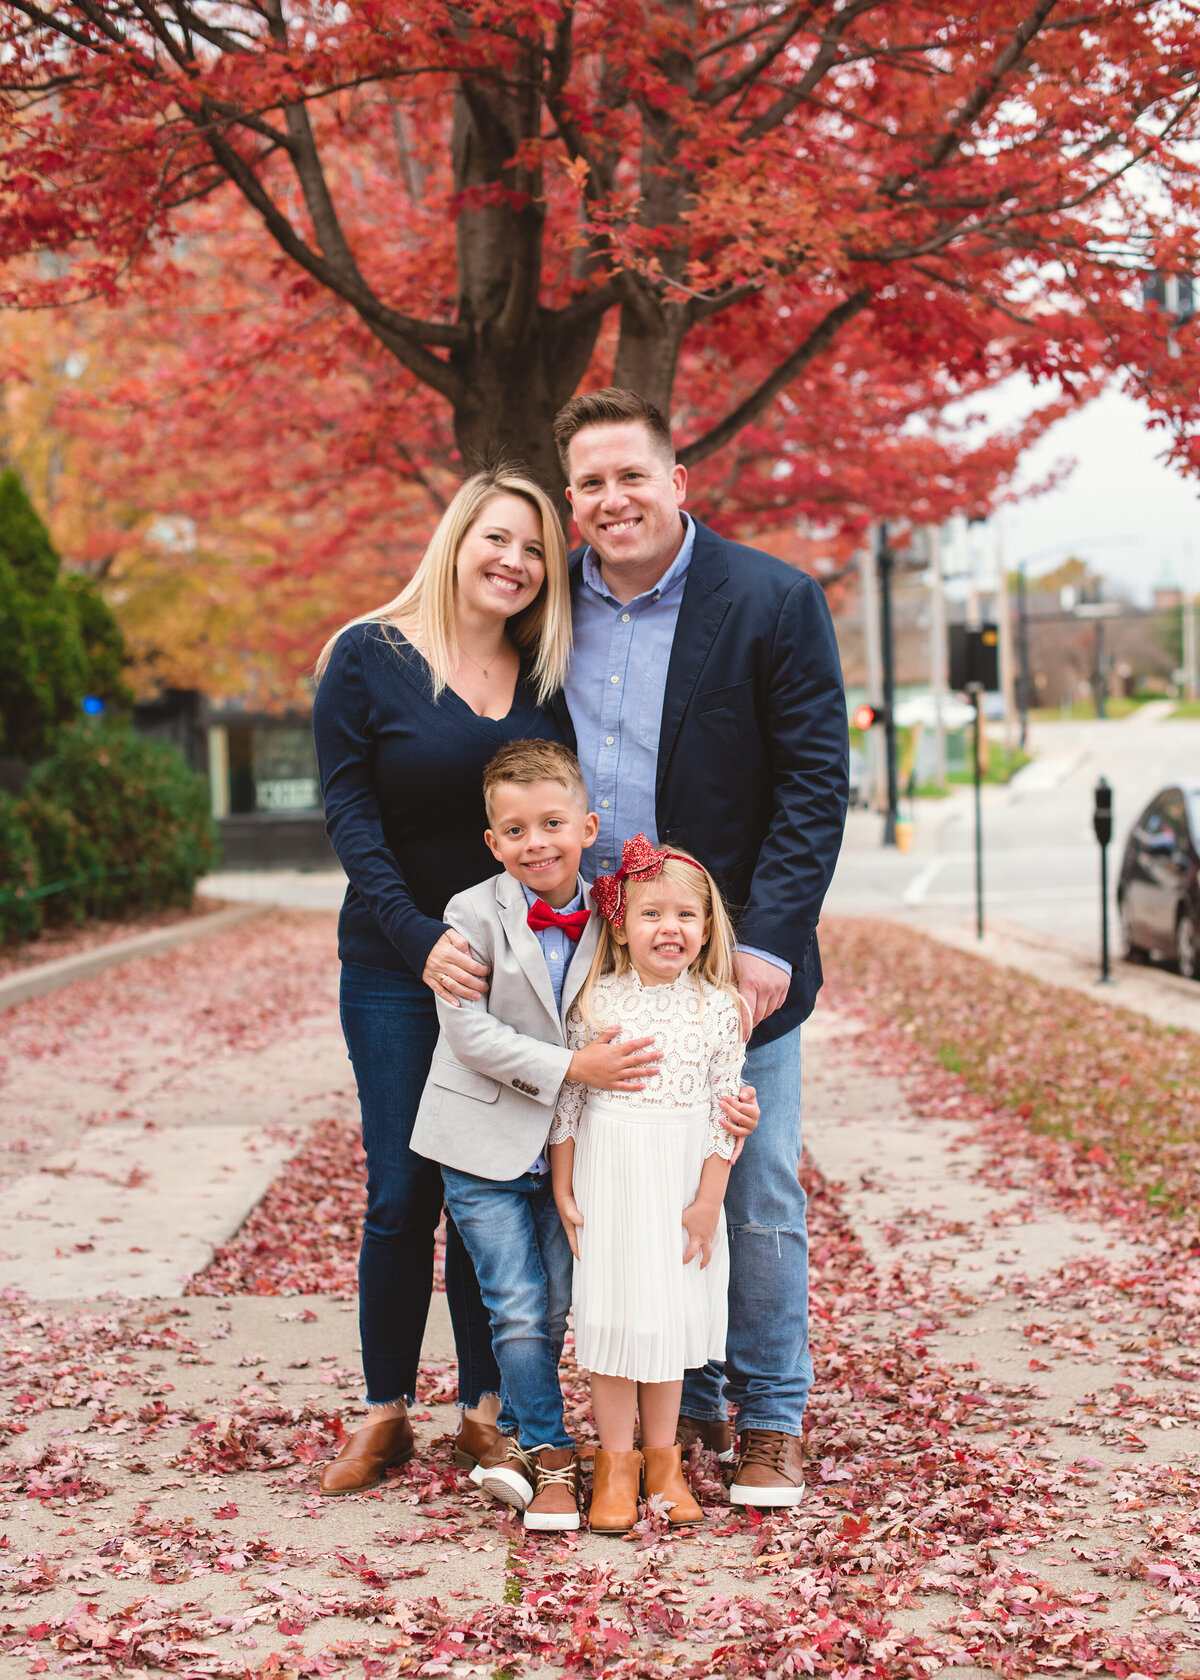 Des-Moines-Iowa-Family-Photographer-Theresa-Schumacher-Photography-Fall-Leaves